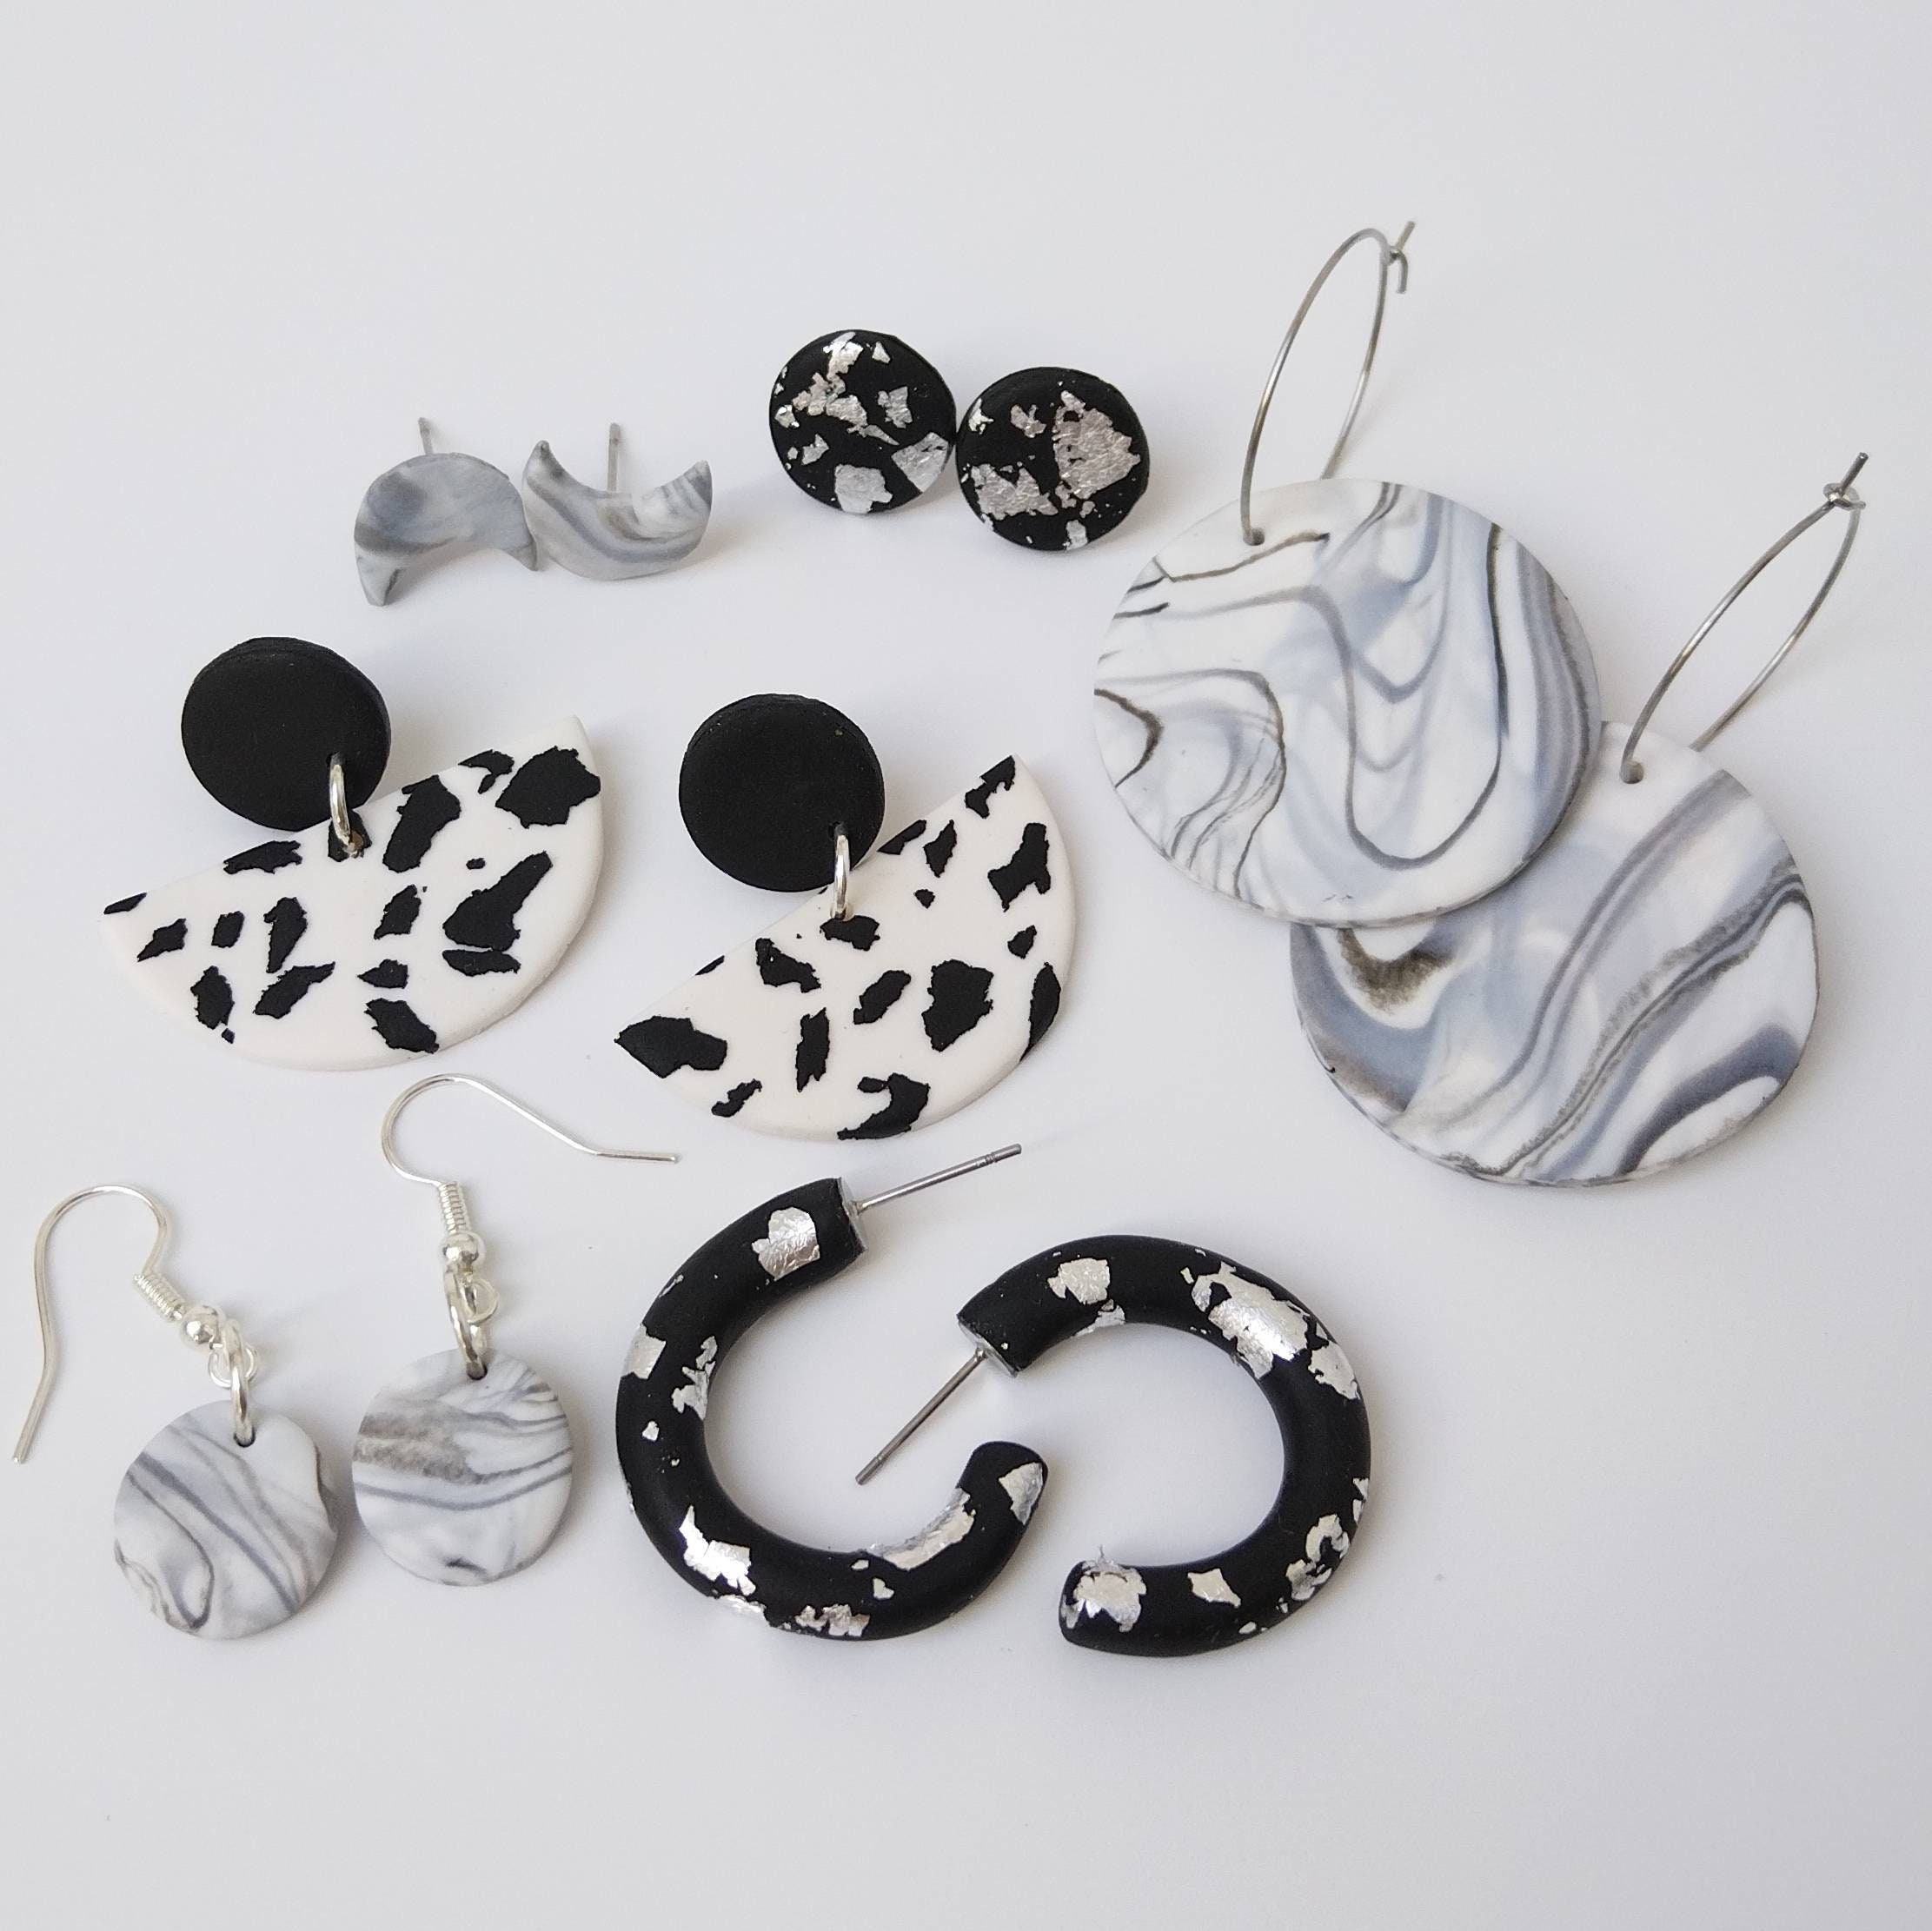 XL 125 Piece Create Bake and Make Polymer Clay Earrings Kit 